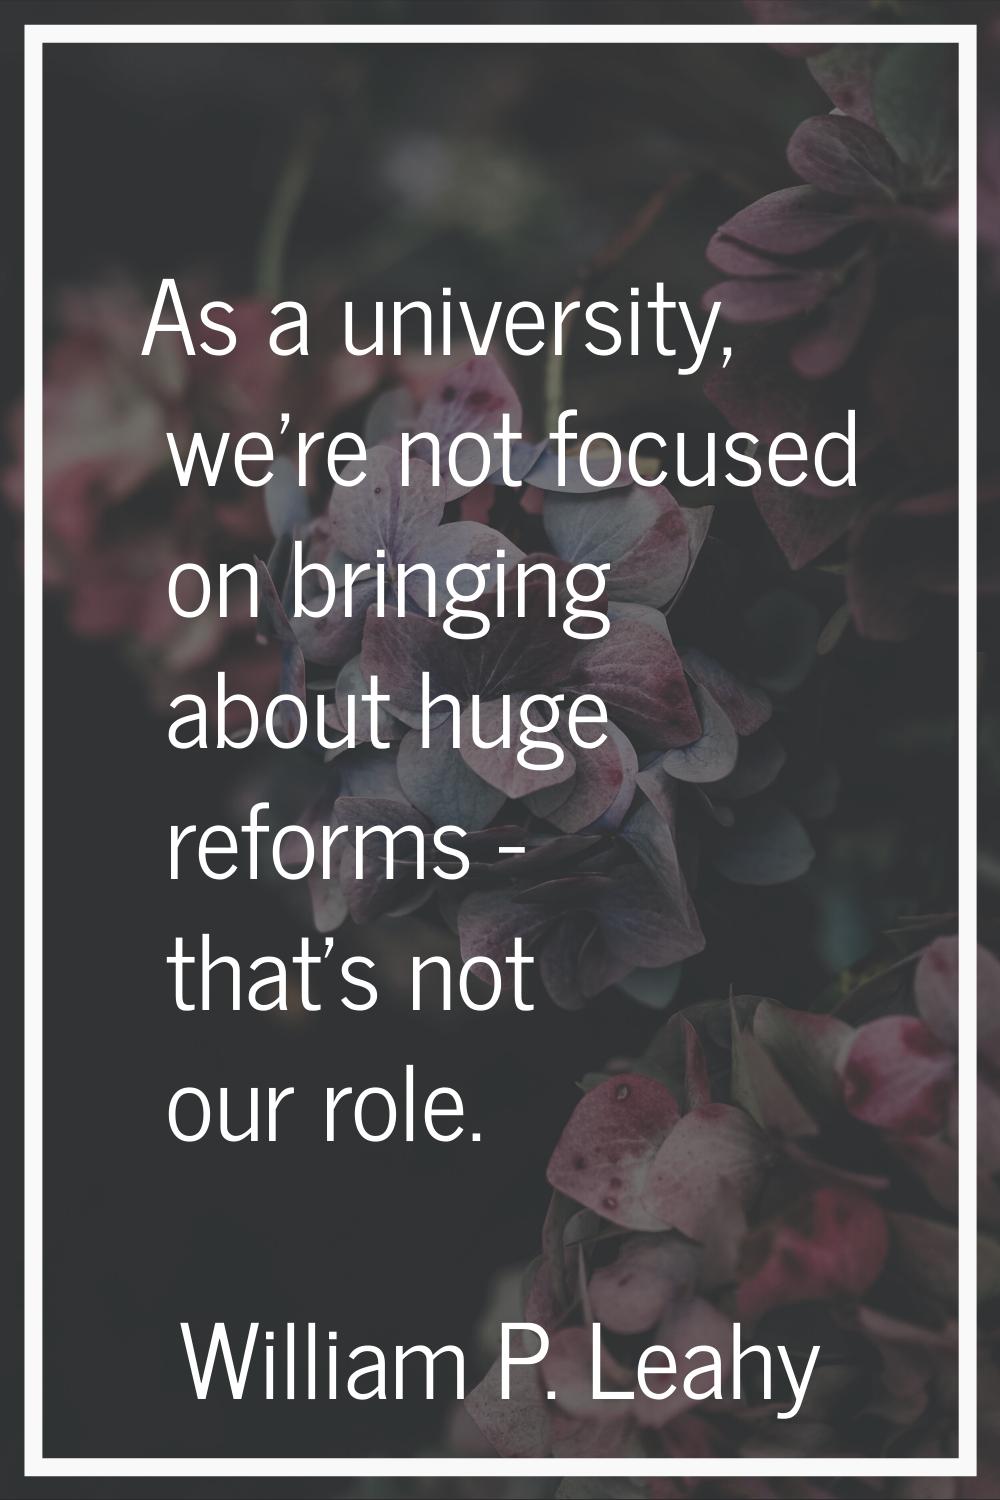 As a university, we're not focused on bringing about huge reforms - that's not our role.